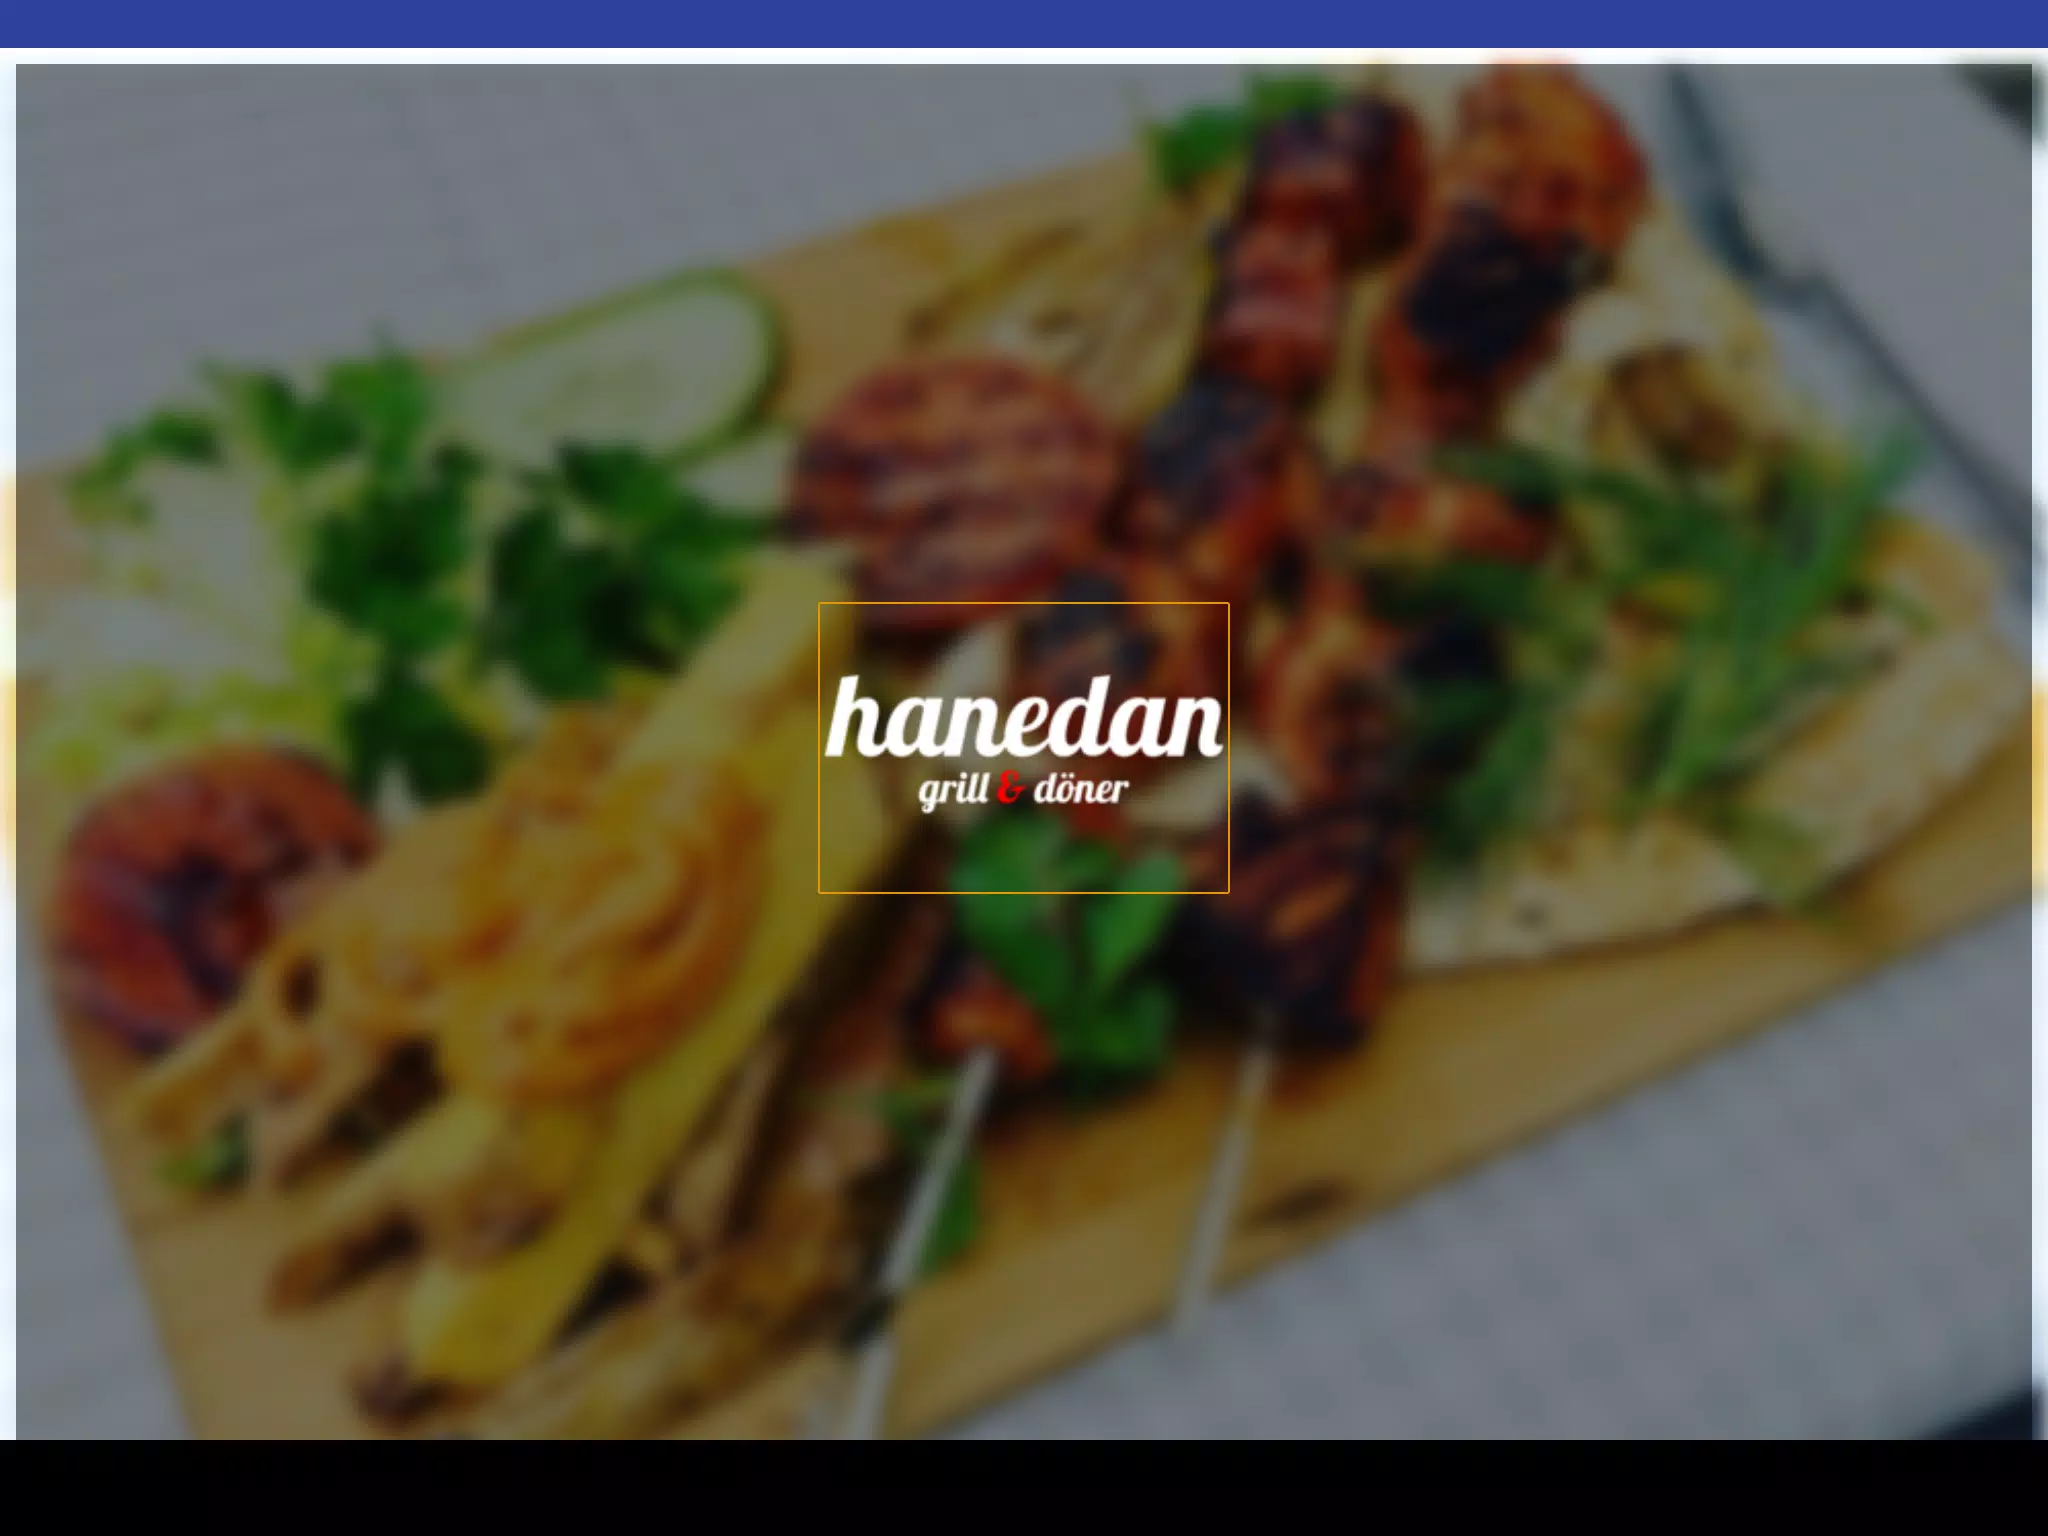 Hanedan Grill & Doner for Android - APK Download